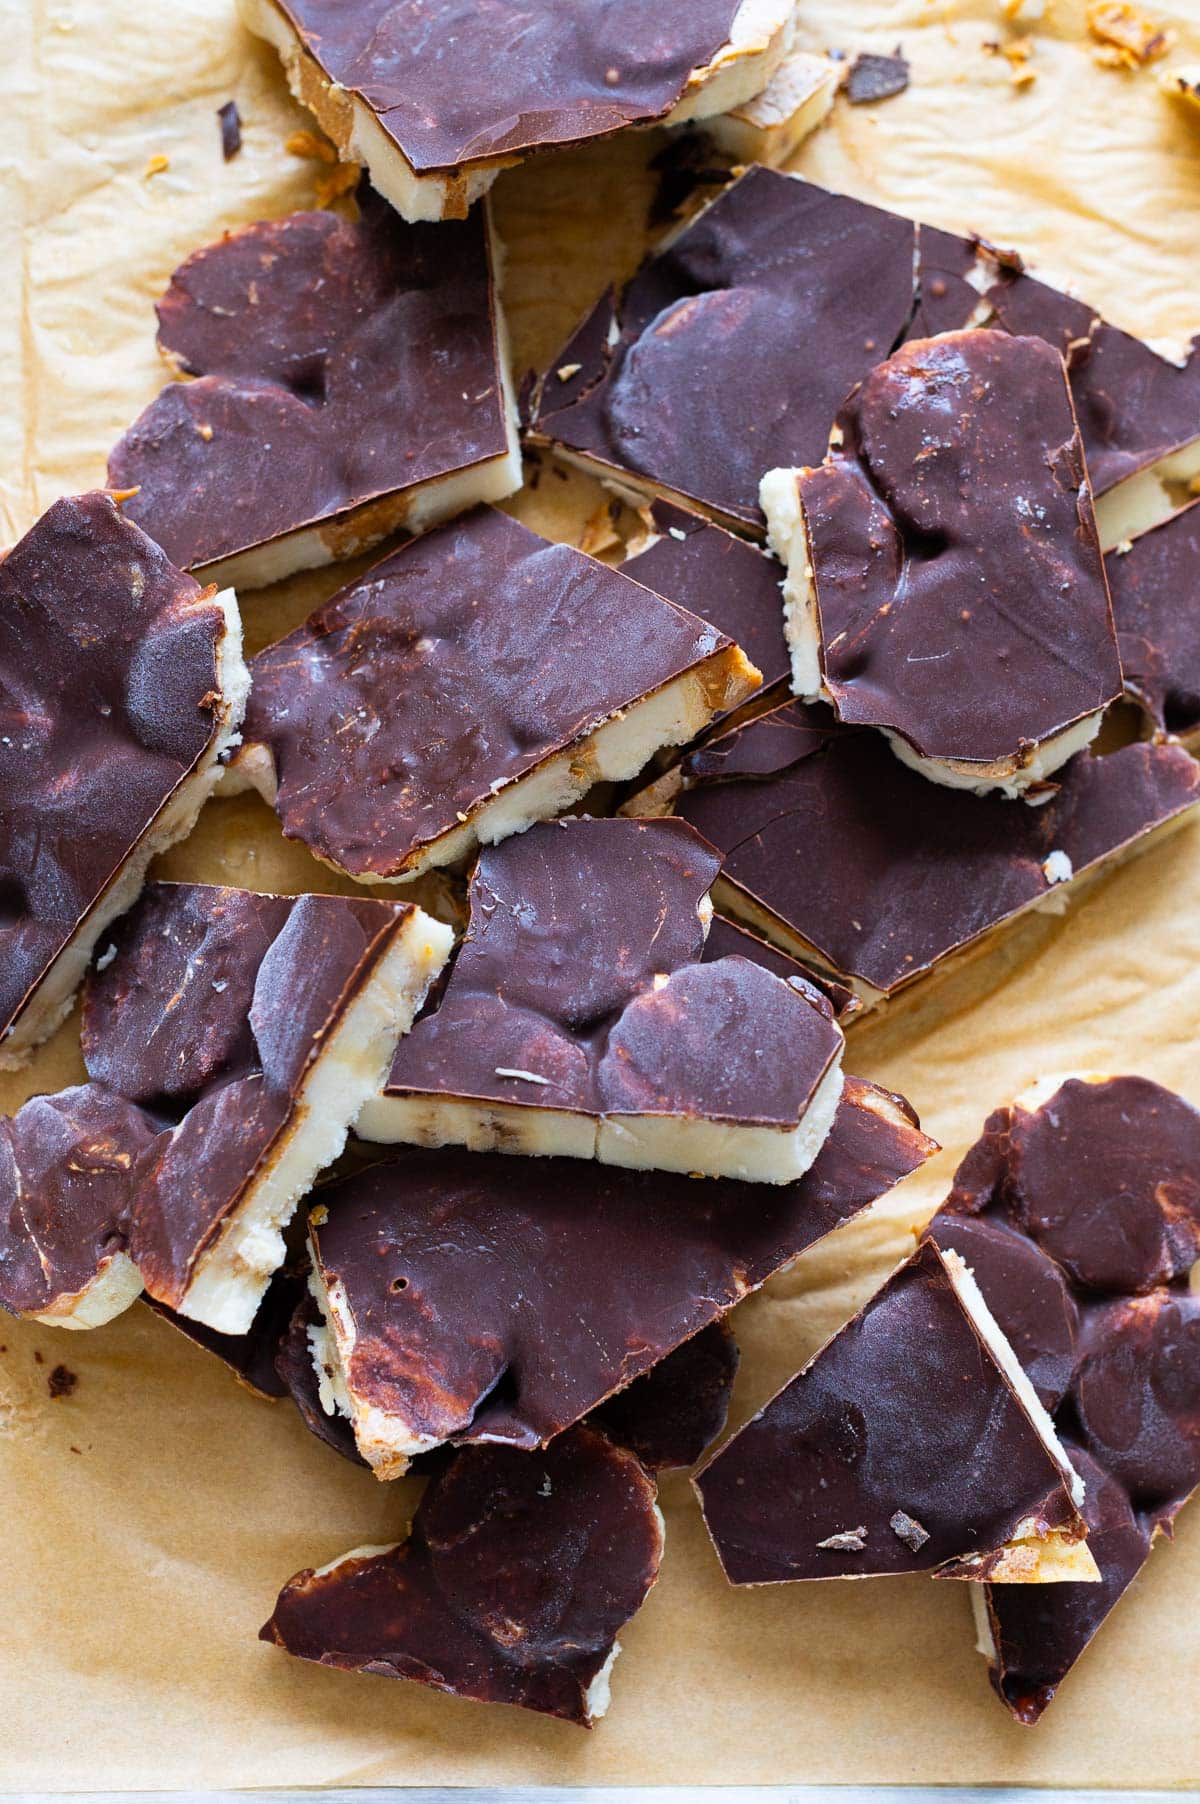 Banana bark slices on parchment paper.